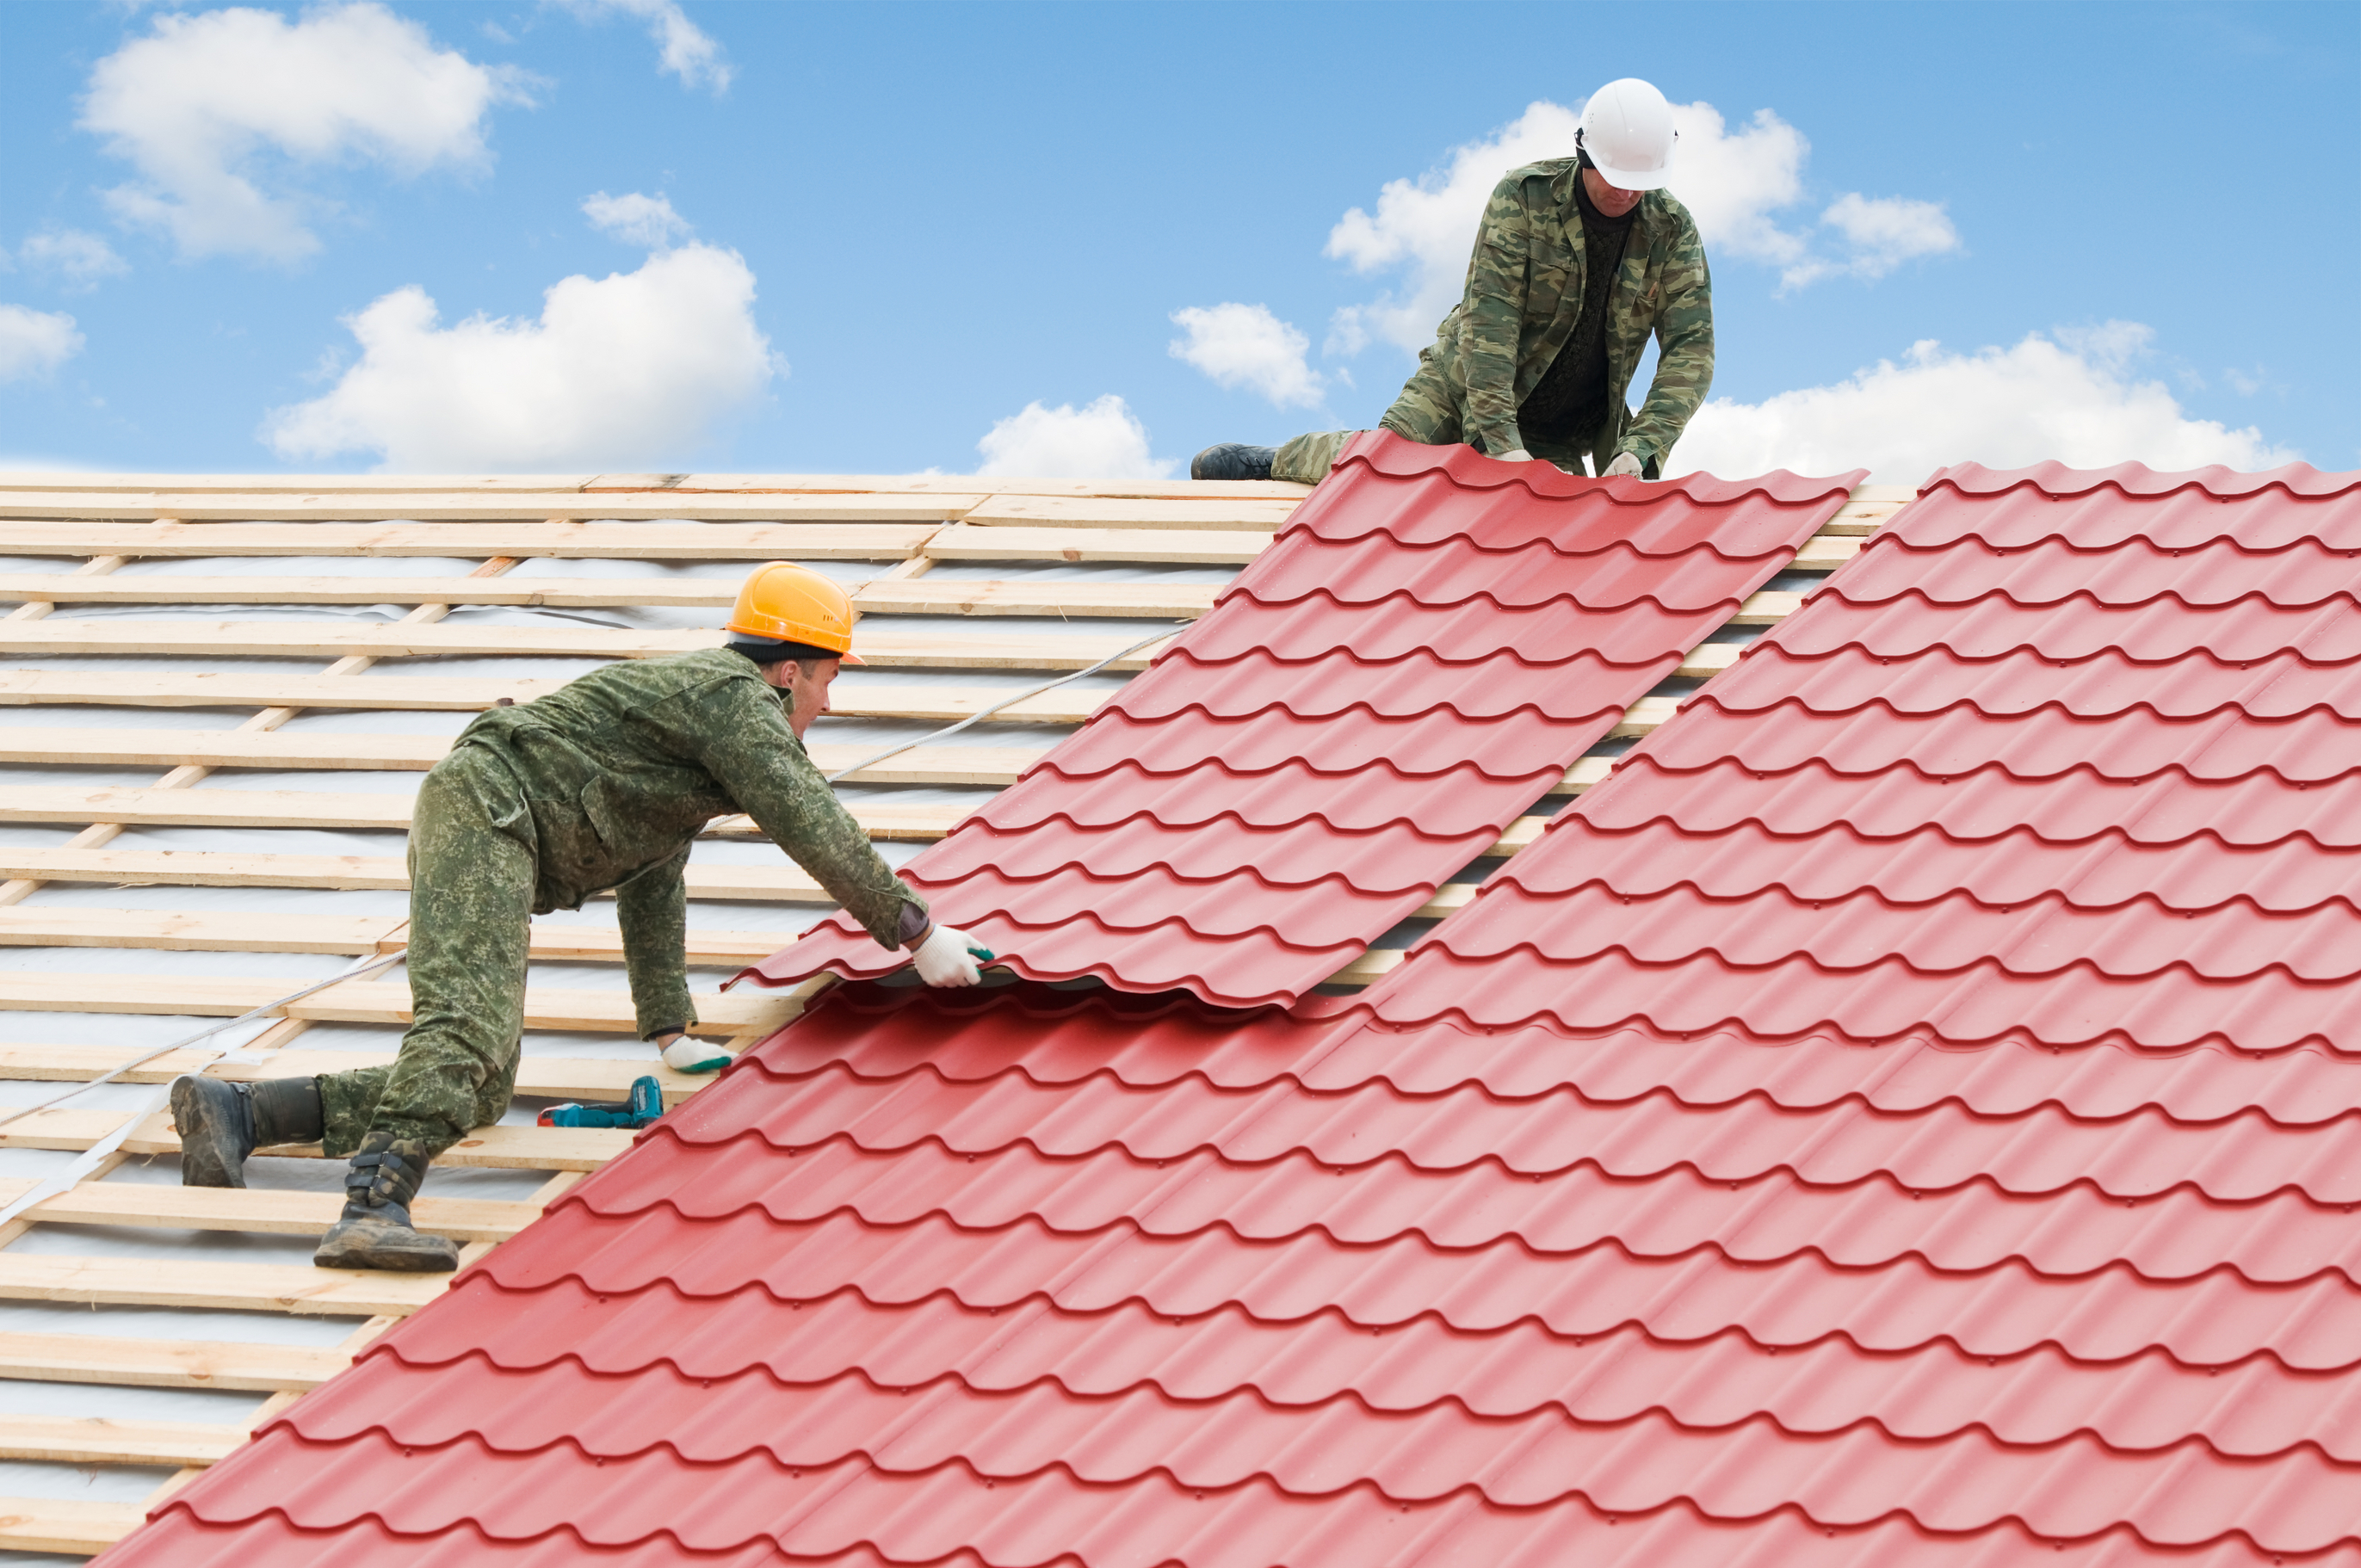 Elite Roofing Solutions Inc – All your roofing needs under one roof